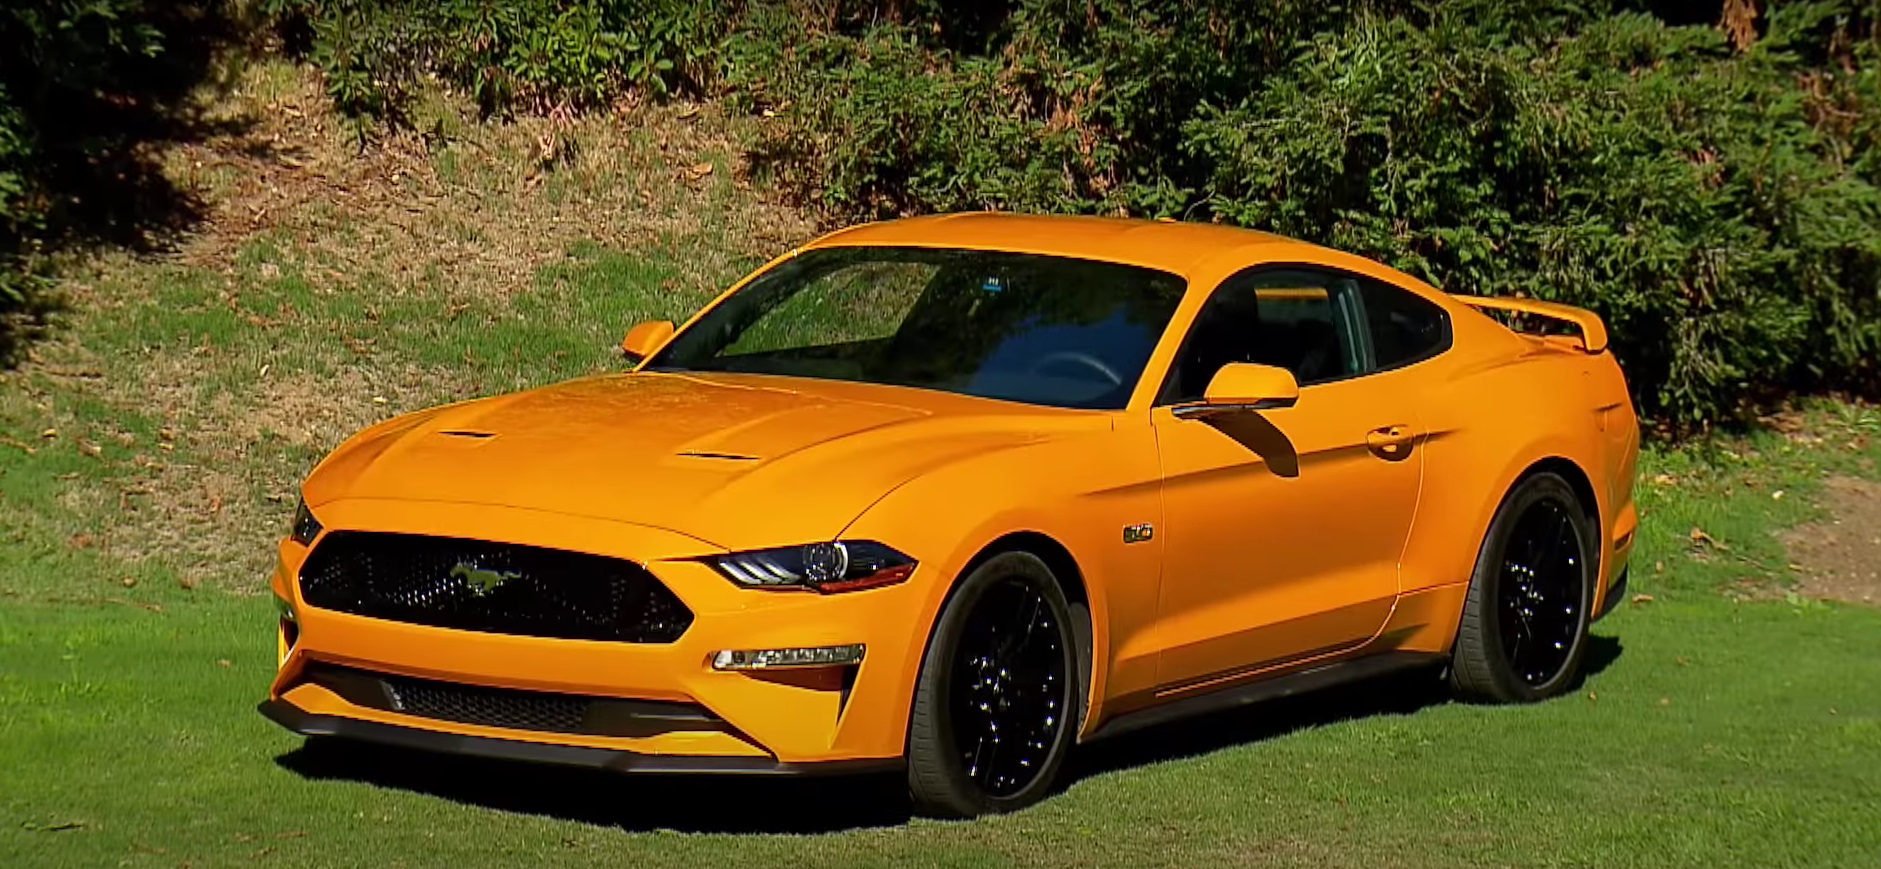 Video: 2018 Ford Mustang - First Drive